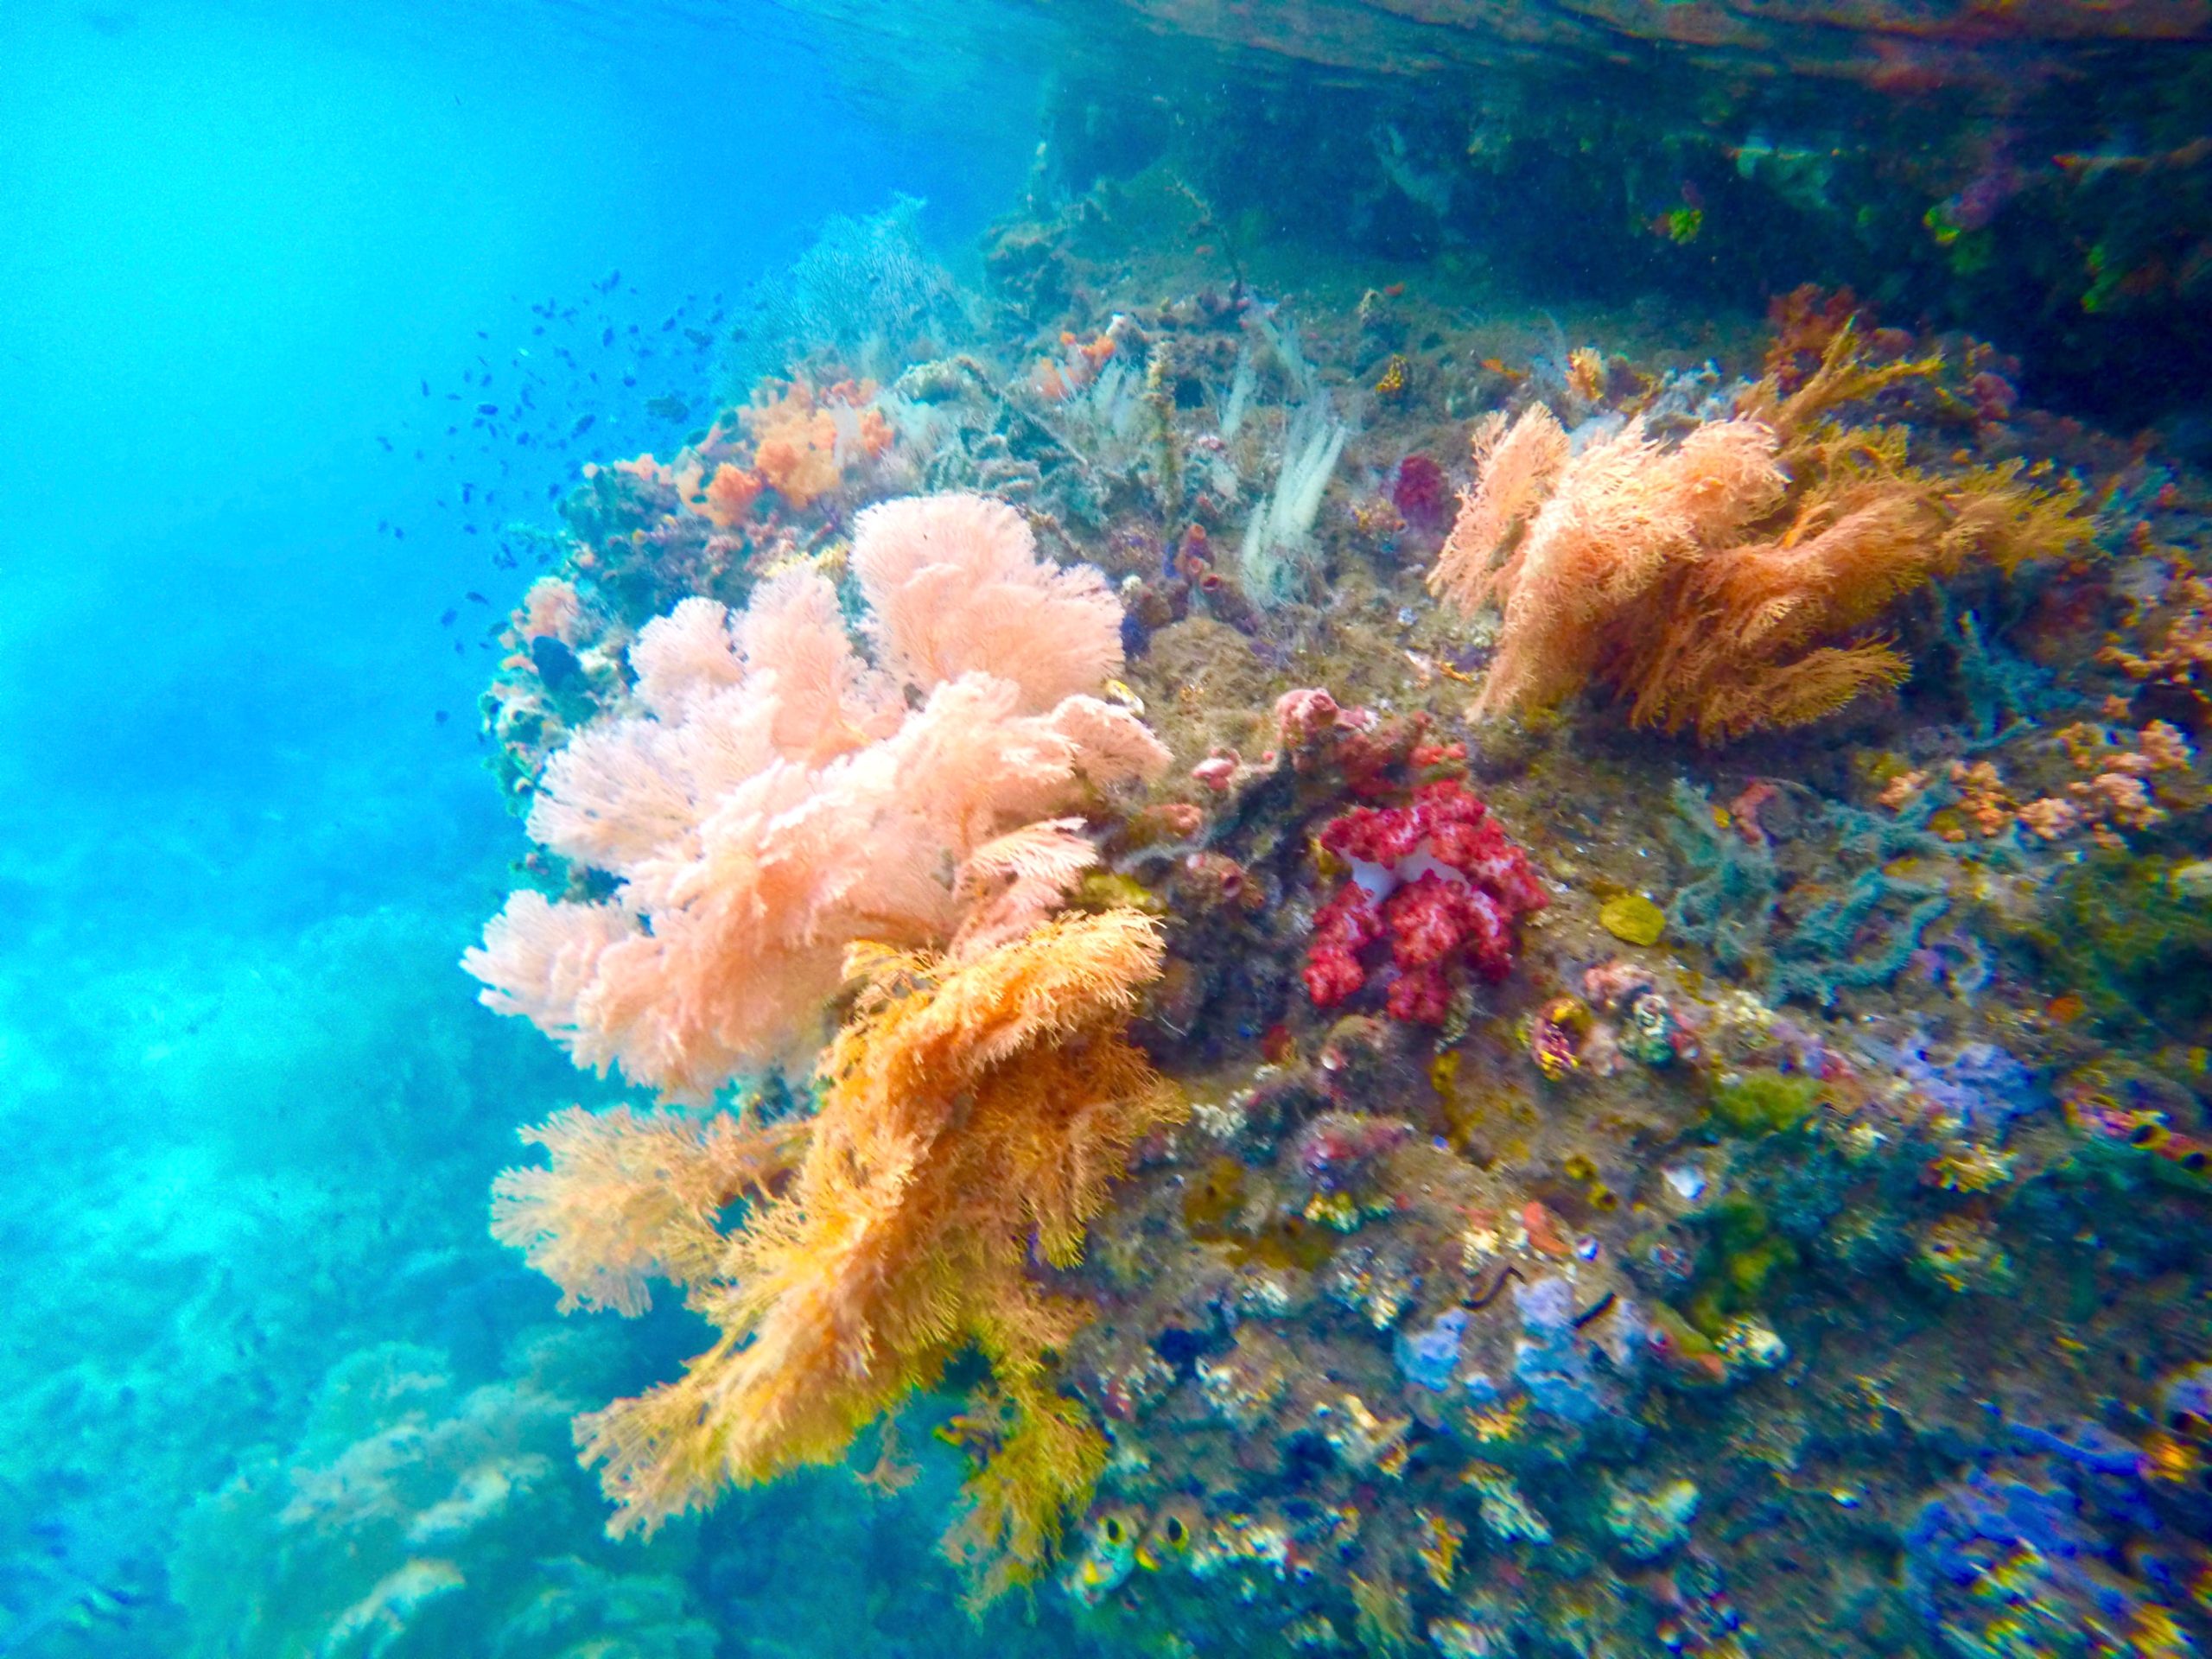 Cruise Ship Smashes Into One Of The World’s Most Beautiful Coral Reefs